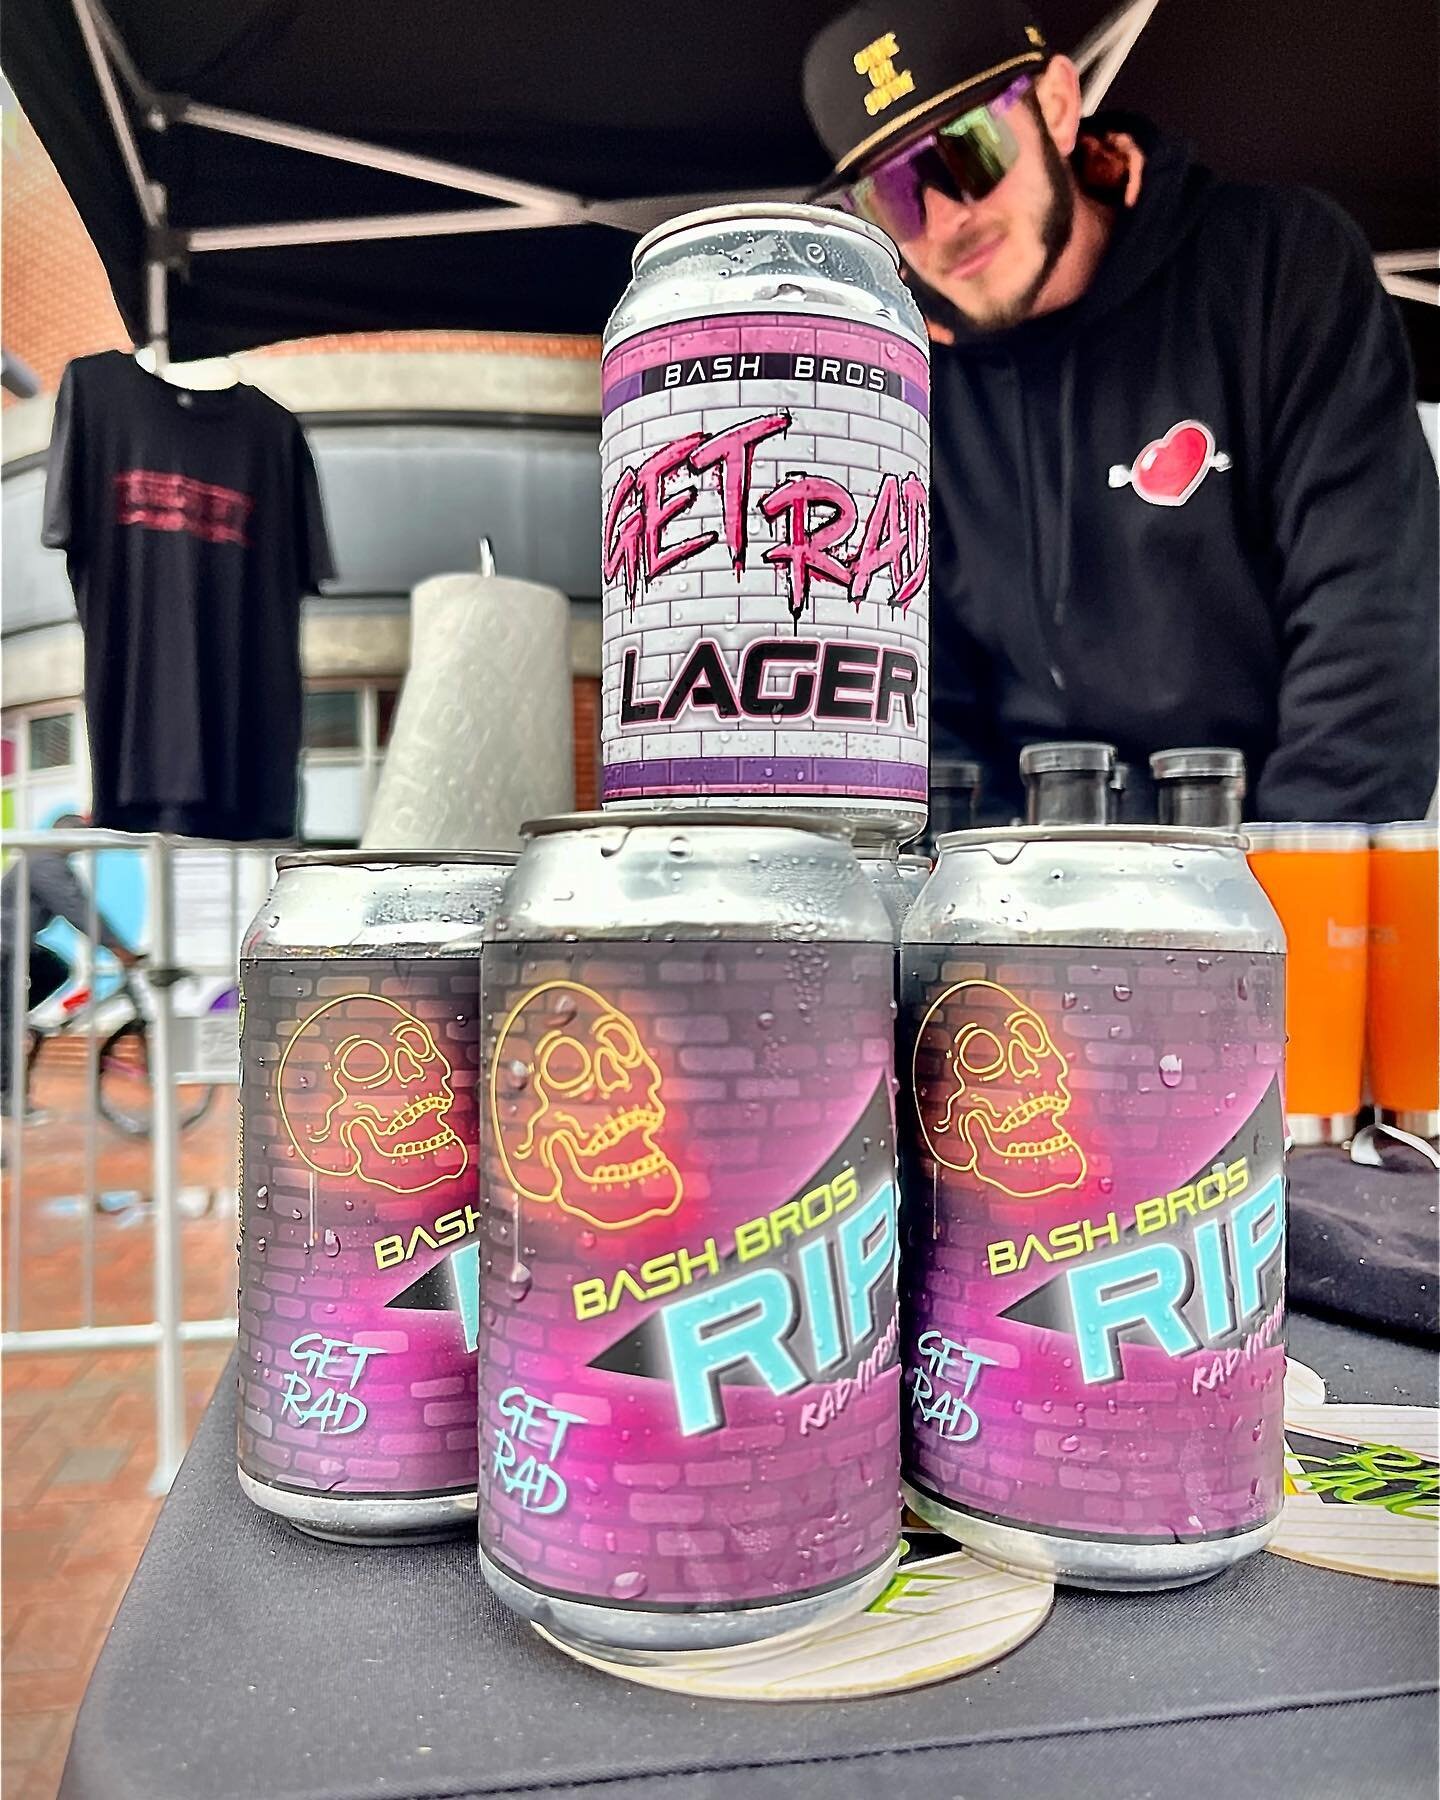 Who&rsquo;s drinking GET RAD and RIPA&rsquo;S this Thirsty Thursday? Well if you are, RAD, if not you&rsquo;d be a lot cooler if you were!
.
If your liquor store, Bar or Restaurant needs it, hit us up or your rep at @otherside_beverage 
.
⚡️GET RAD⚡️